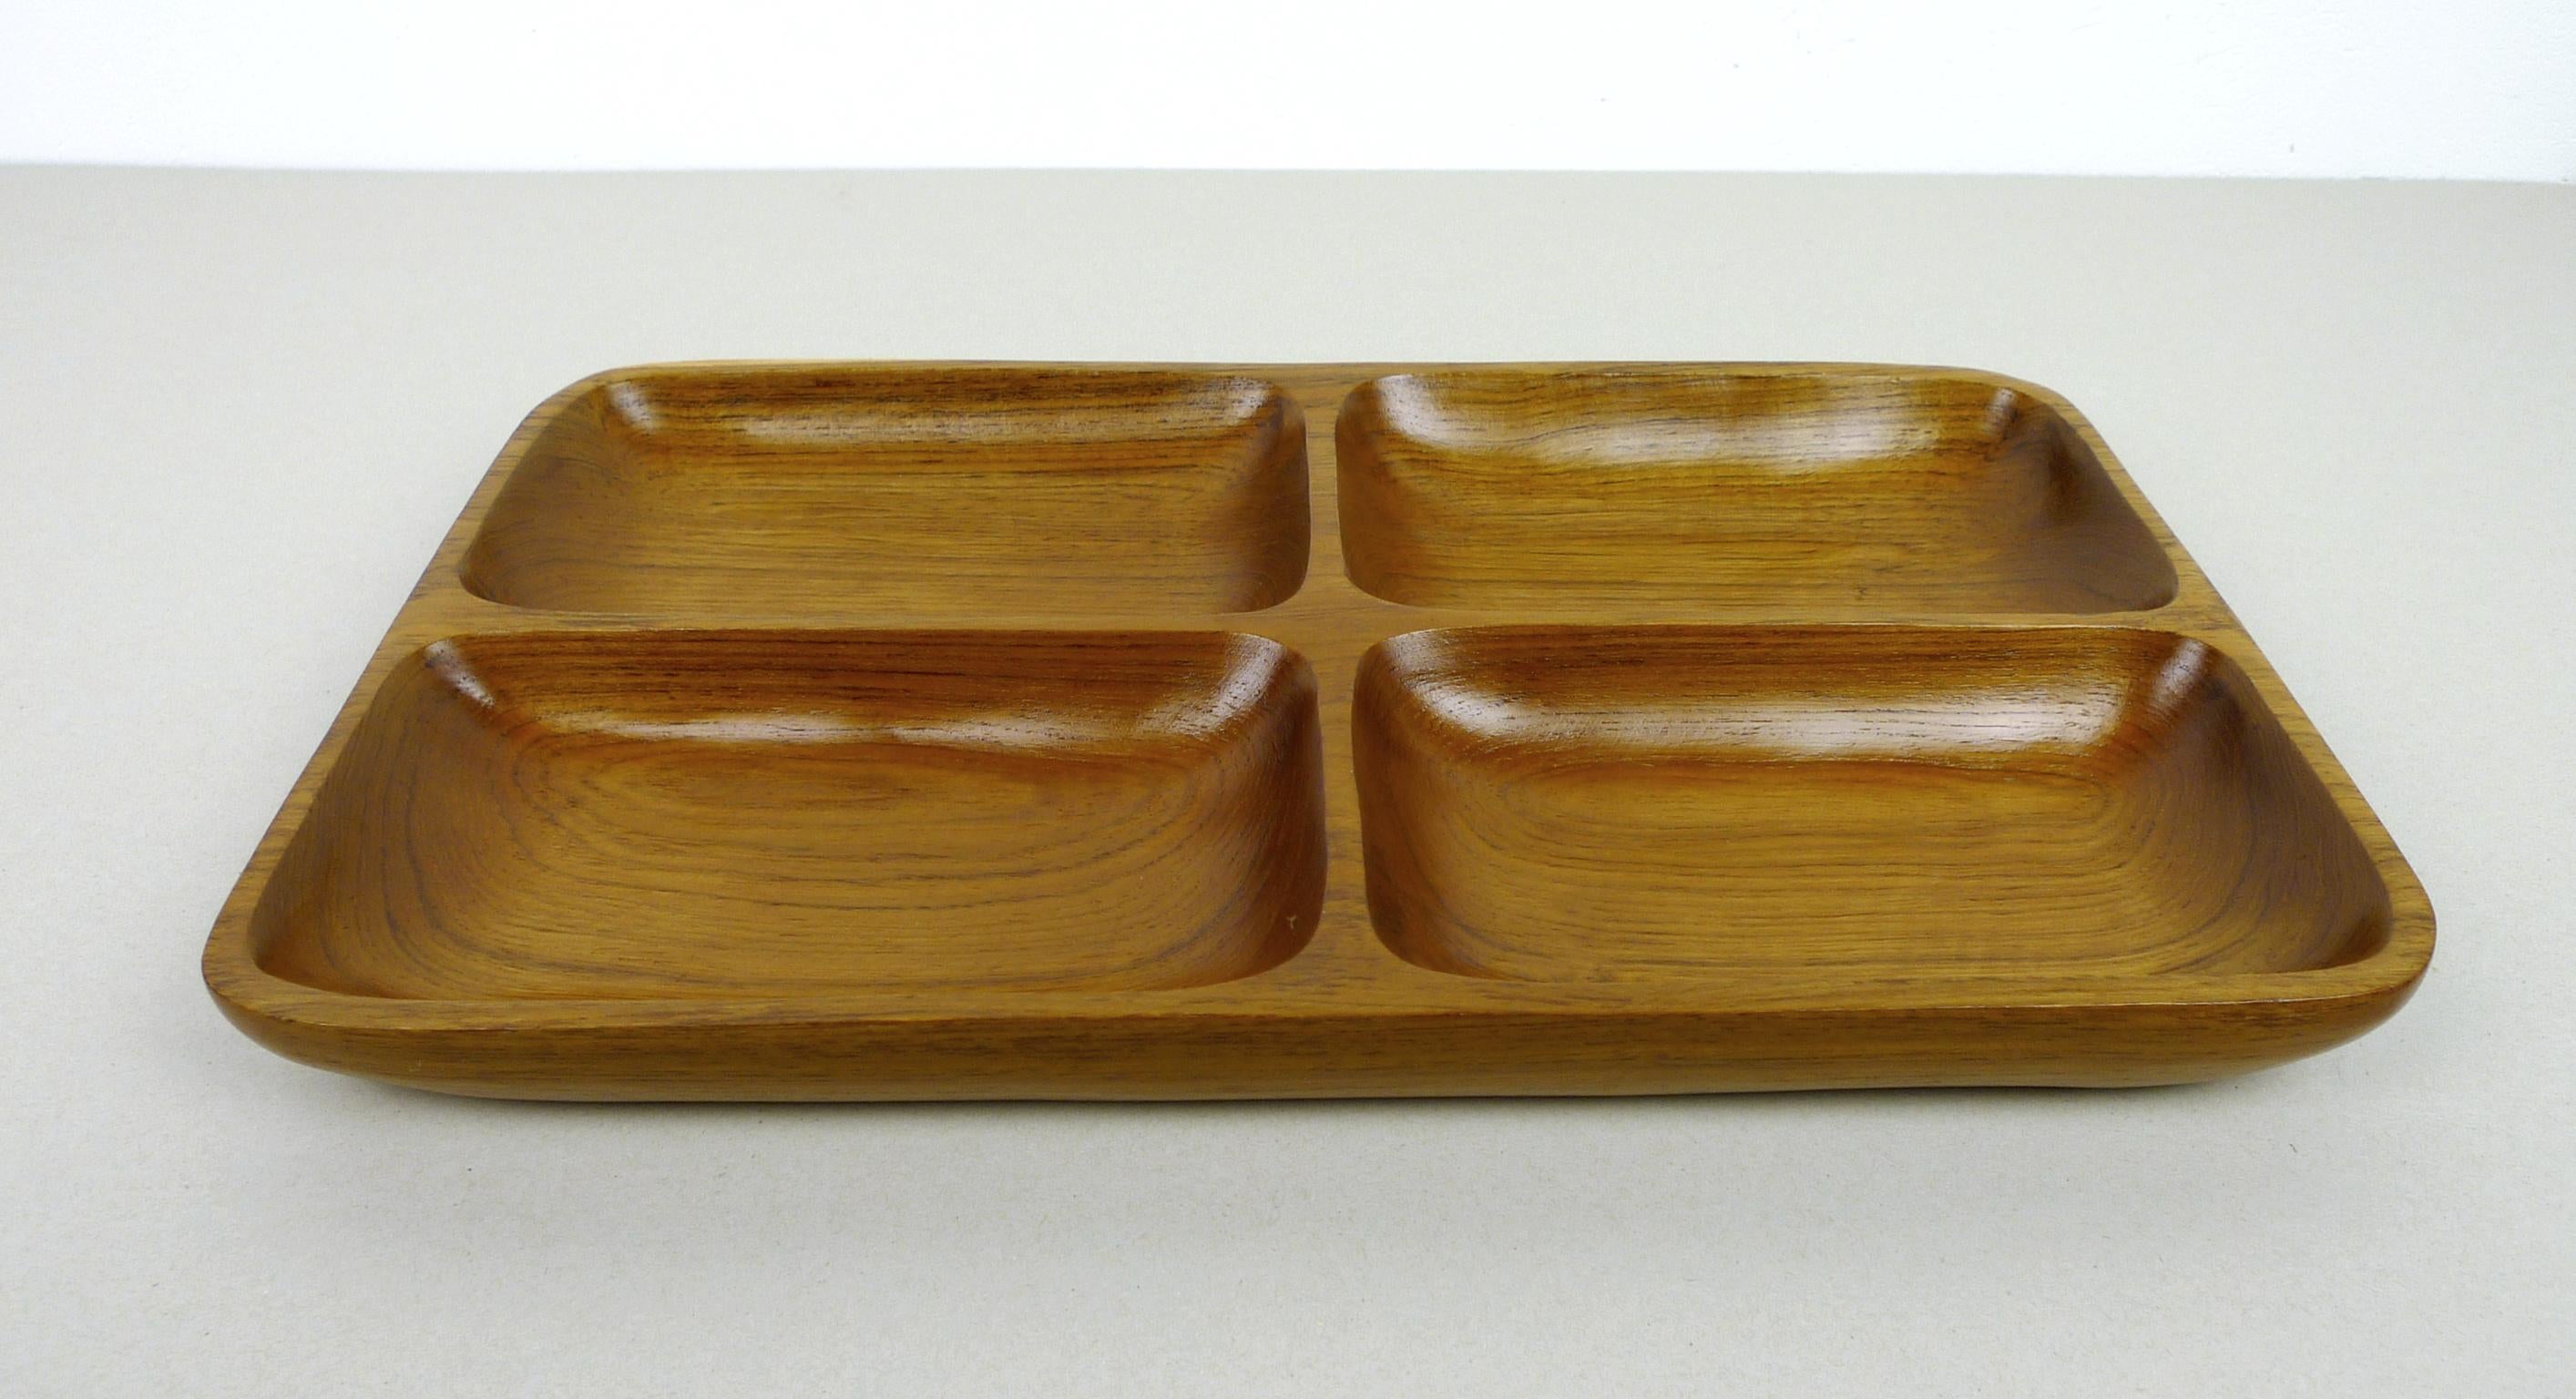 20th Century Solid Teak Wood Bowl with Four Compartments, Denmark, 1960s For Sale